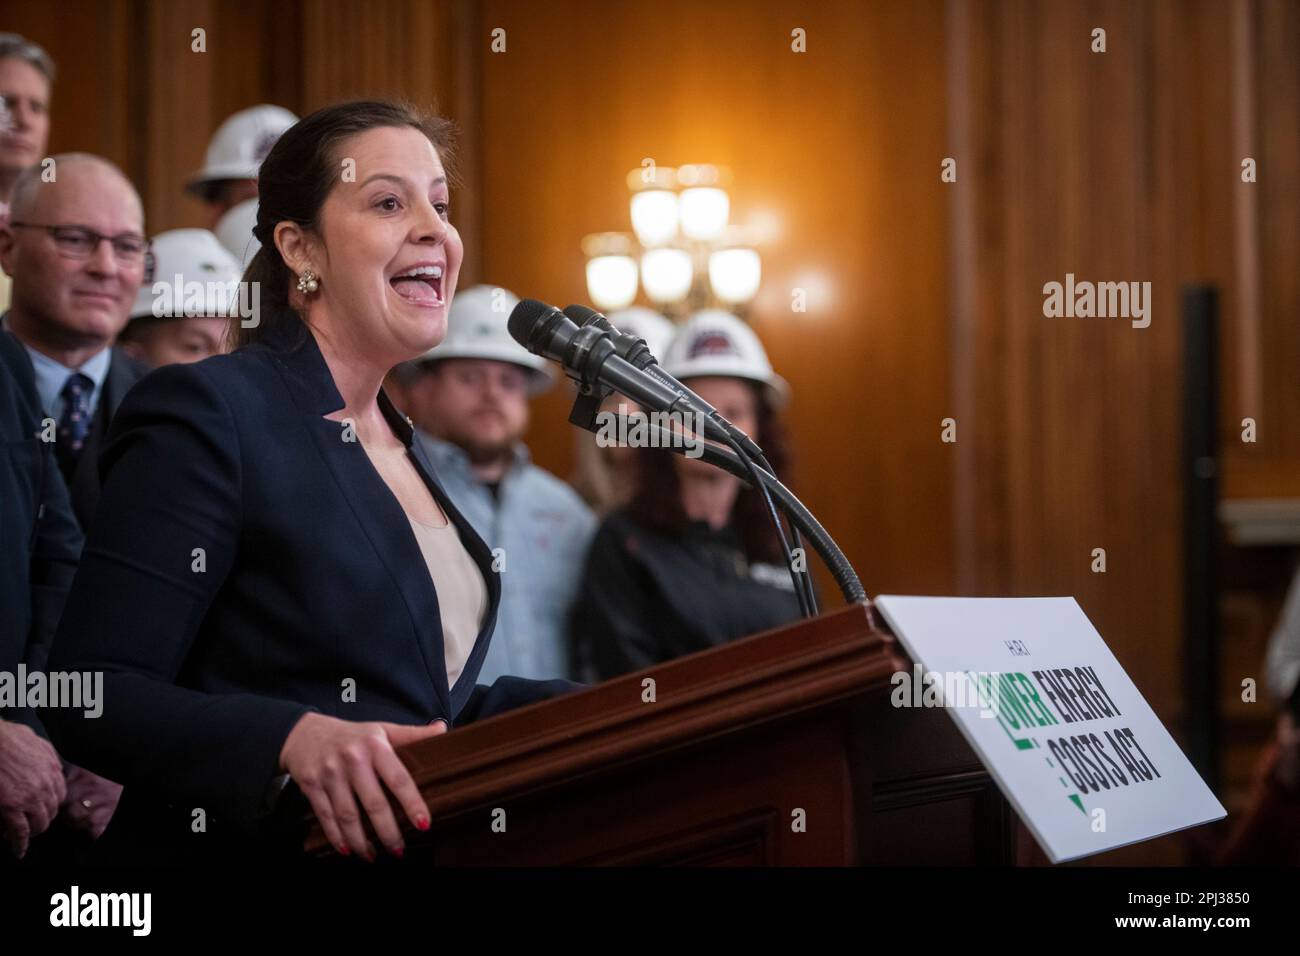 House Republican Conference Chairwoman United States Representative Elise Stefanik (Republican of New York) offers remarks during press conference post passage of H.R. 1, Lower Energy Costs Act, at the US Capitol in Washington, DC, Thursday, March 30, 2023. Credit: Rod Lamkey/CNP /MediaPunch Stock Photo